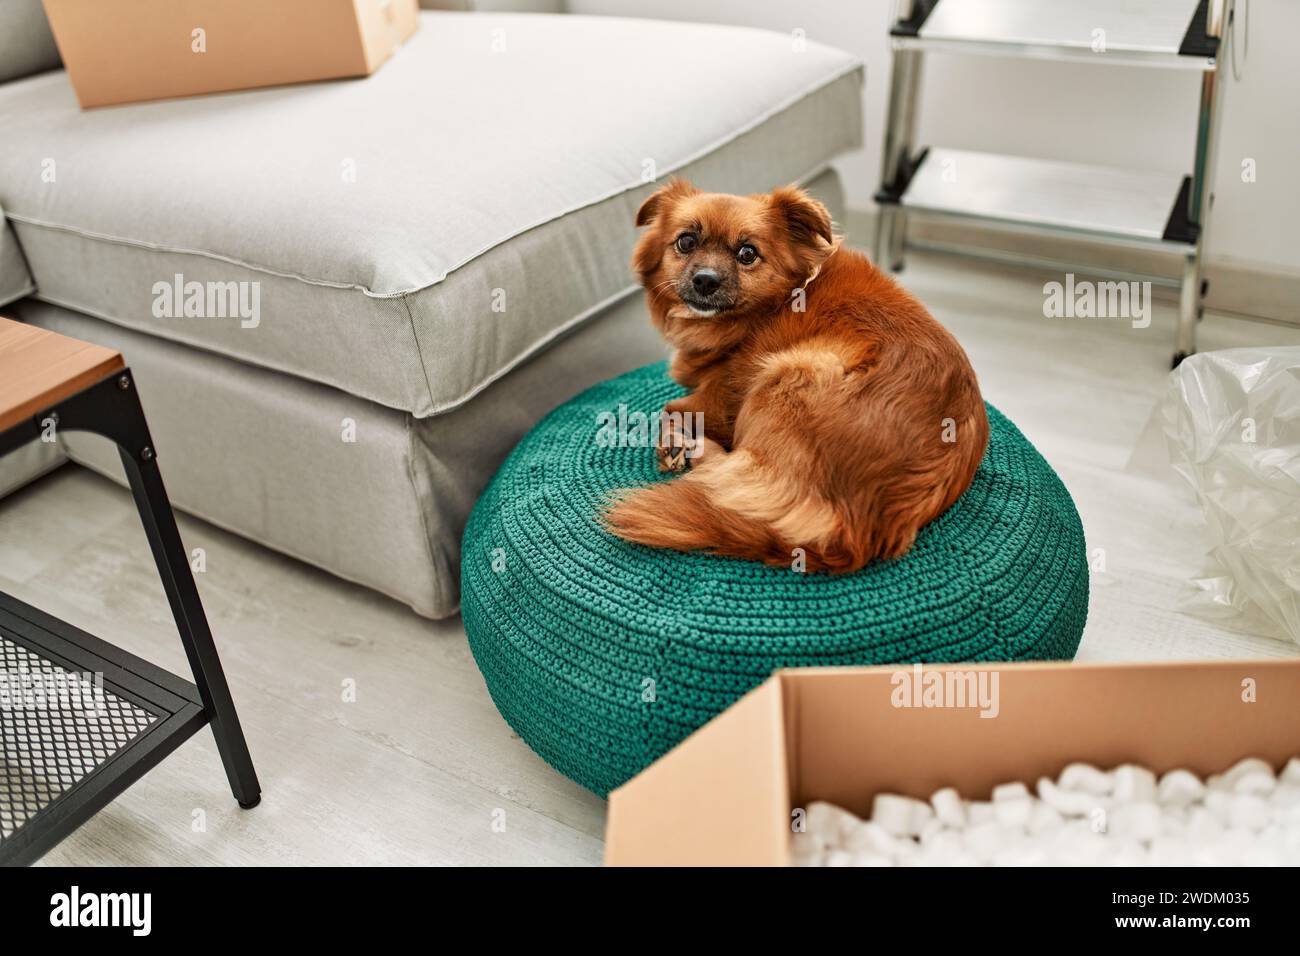 A brown dog sitting on a green knitted pouf in a modern apartment with a cardboard box and unpacking mess around. Stock Photo